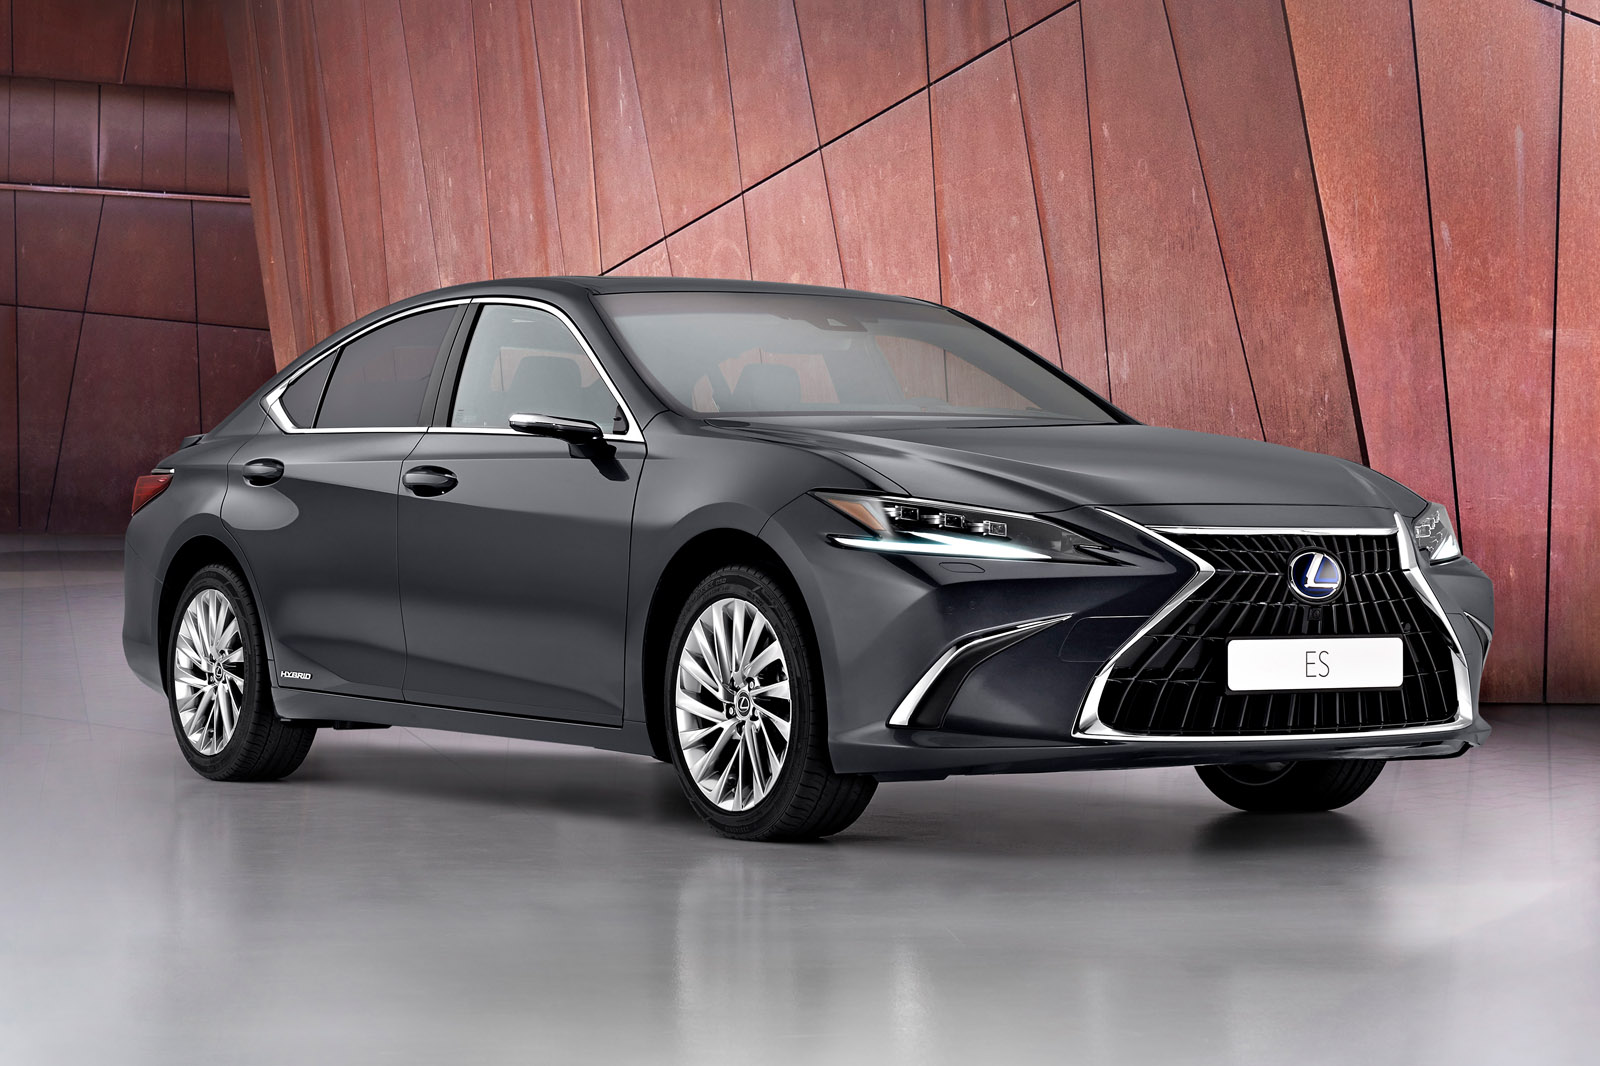 styling-and-chassis-updates-for-2021-lexus-es-saloon-autocar